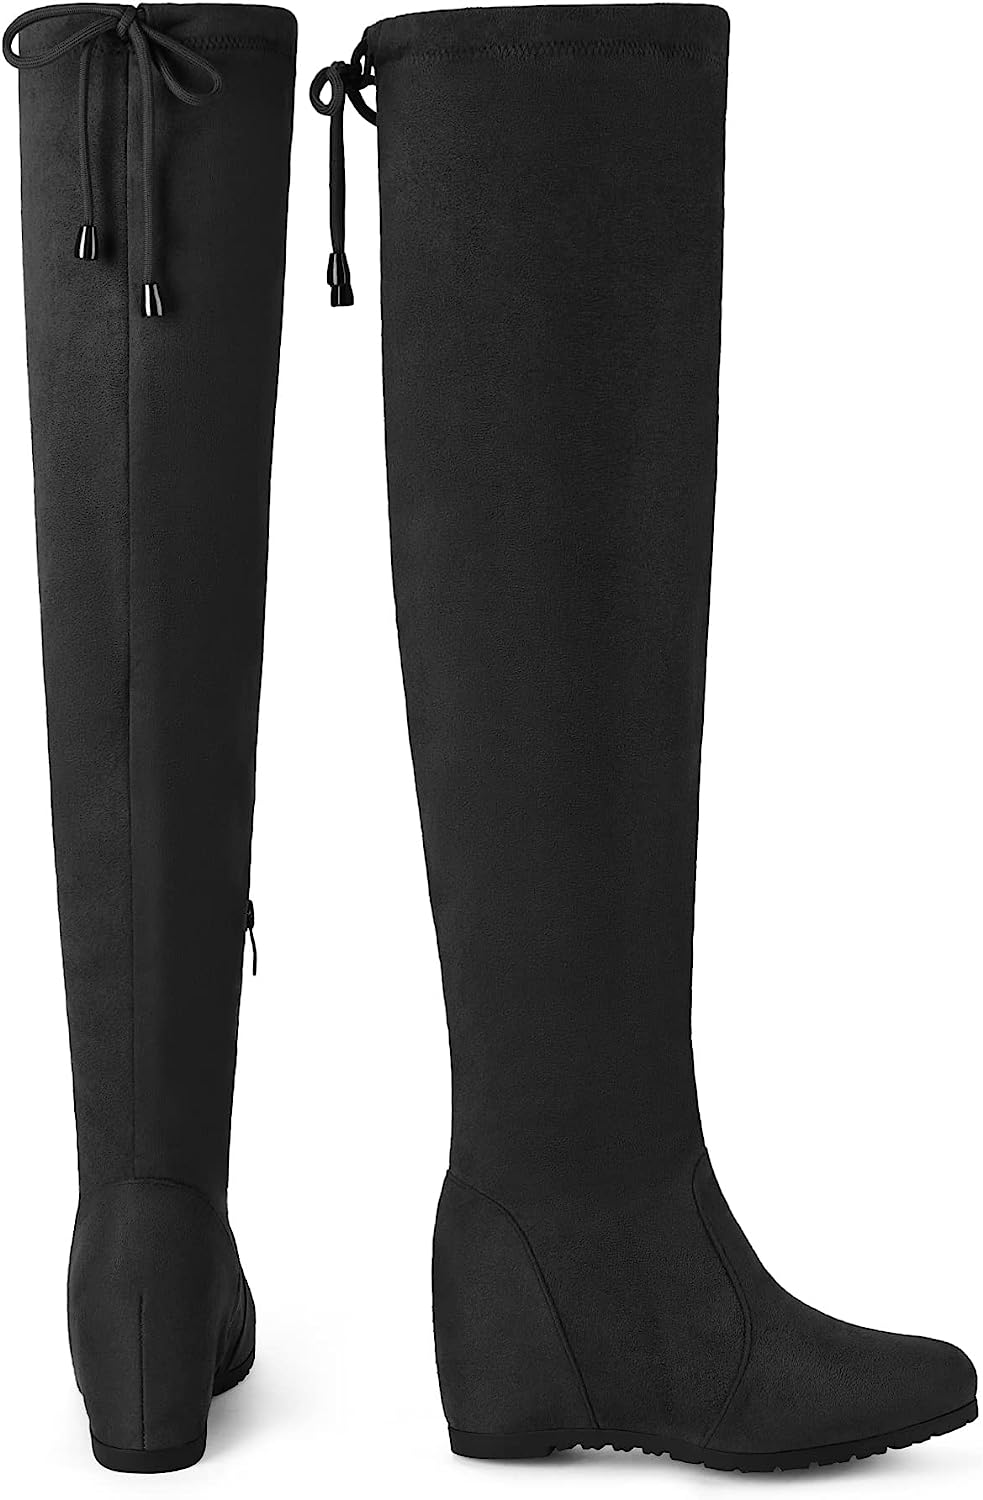 Women's Over The Knee Thigh High Wedge Heel Boots